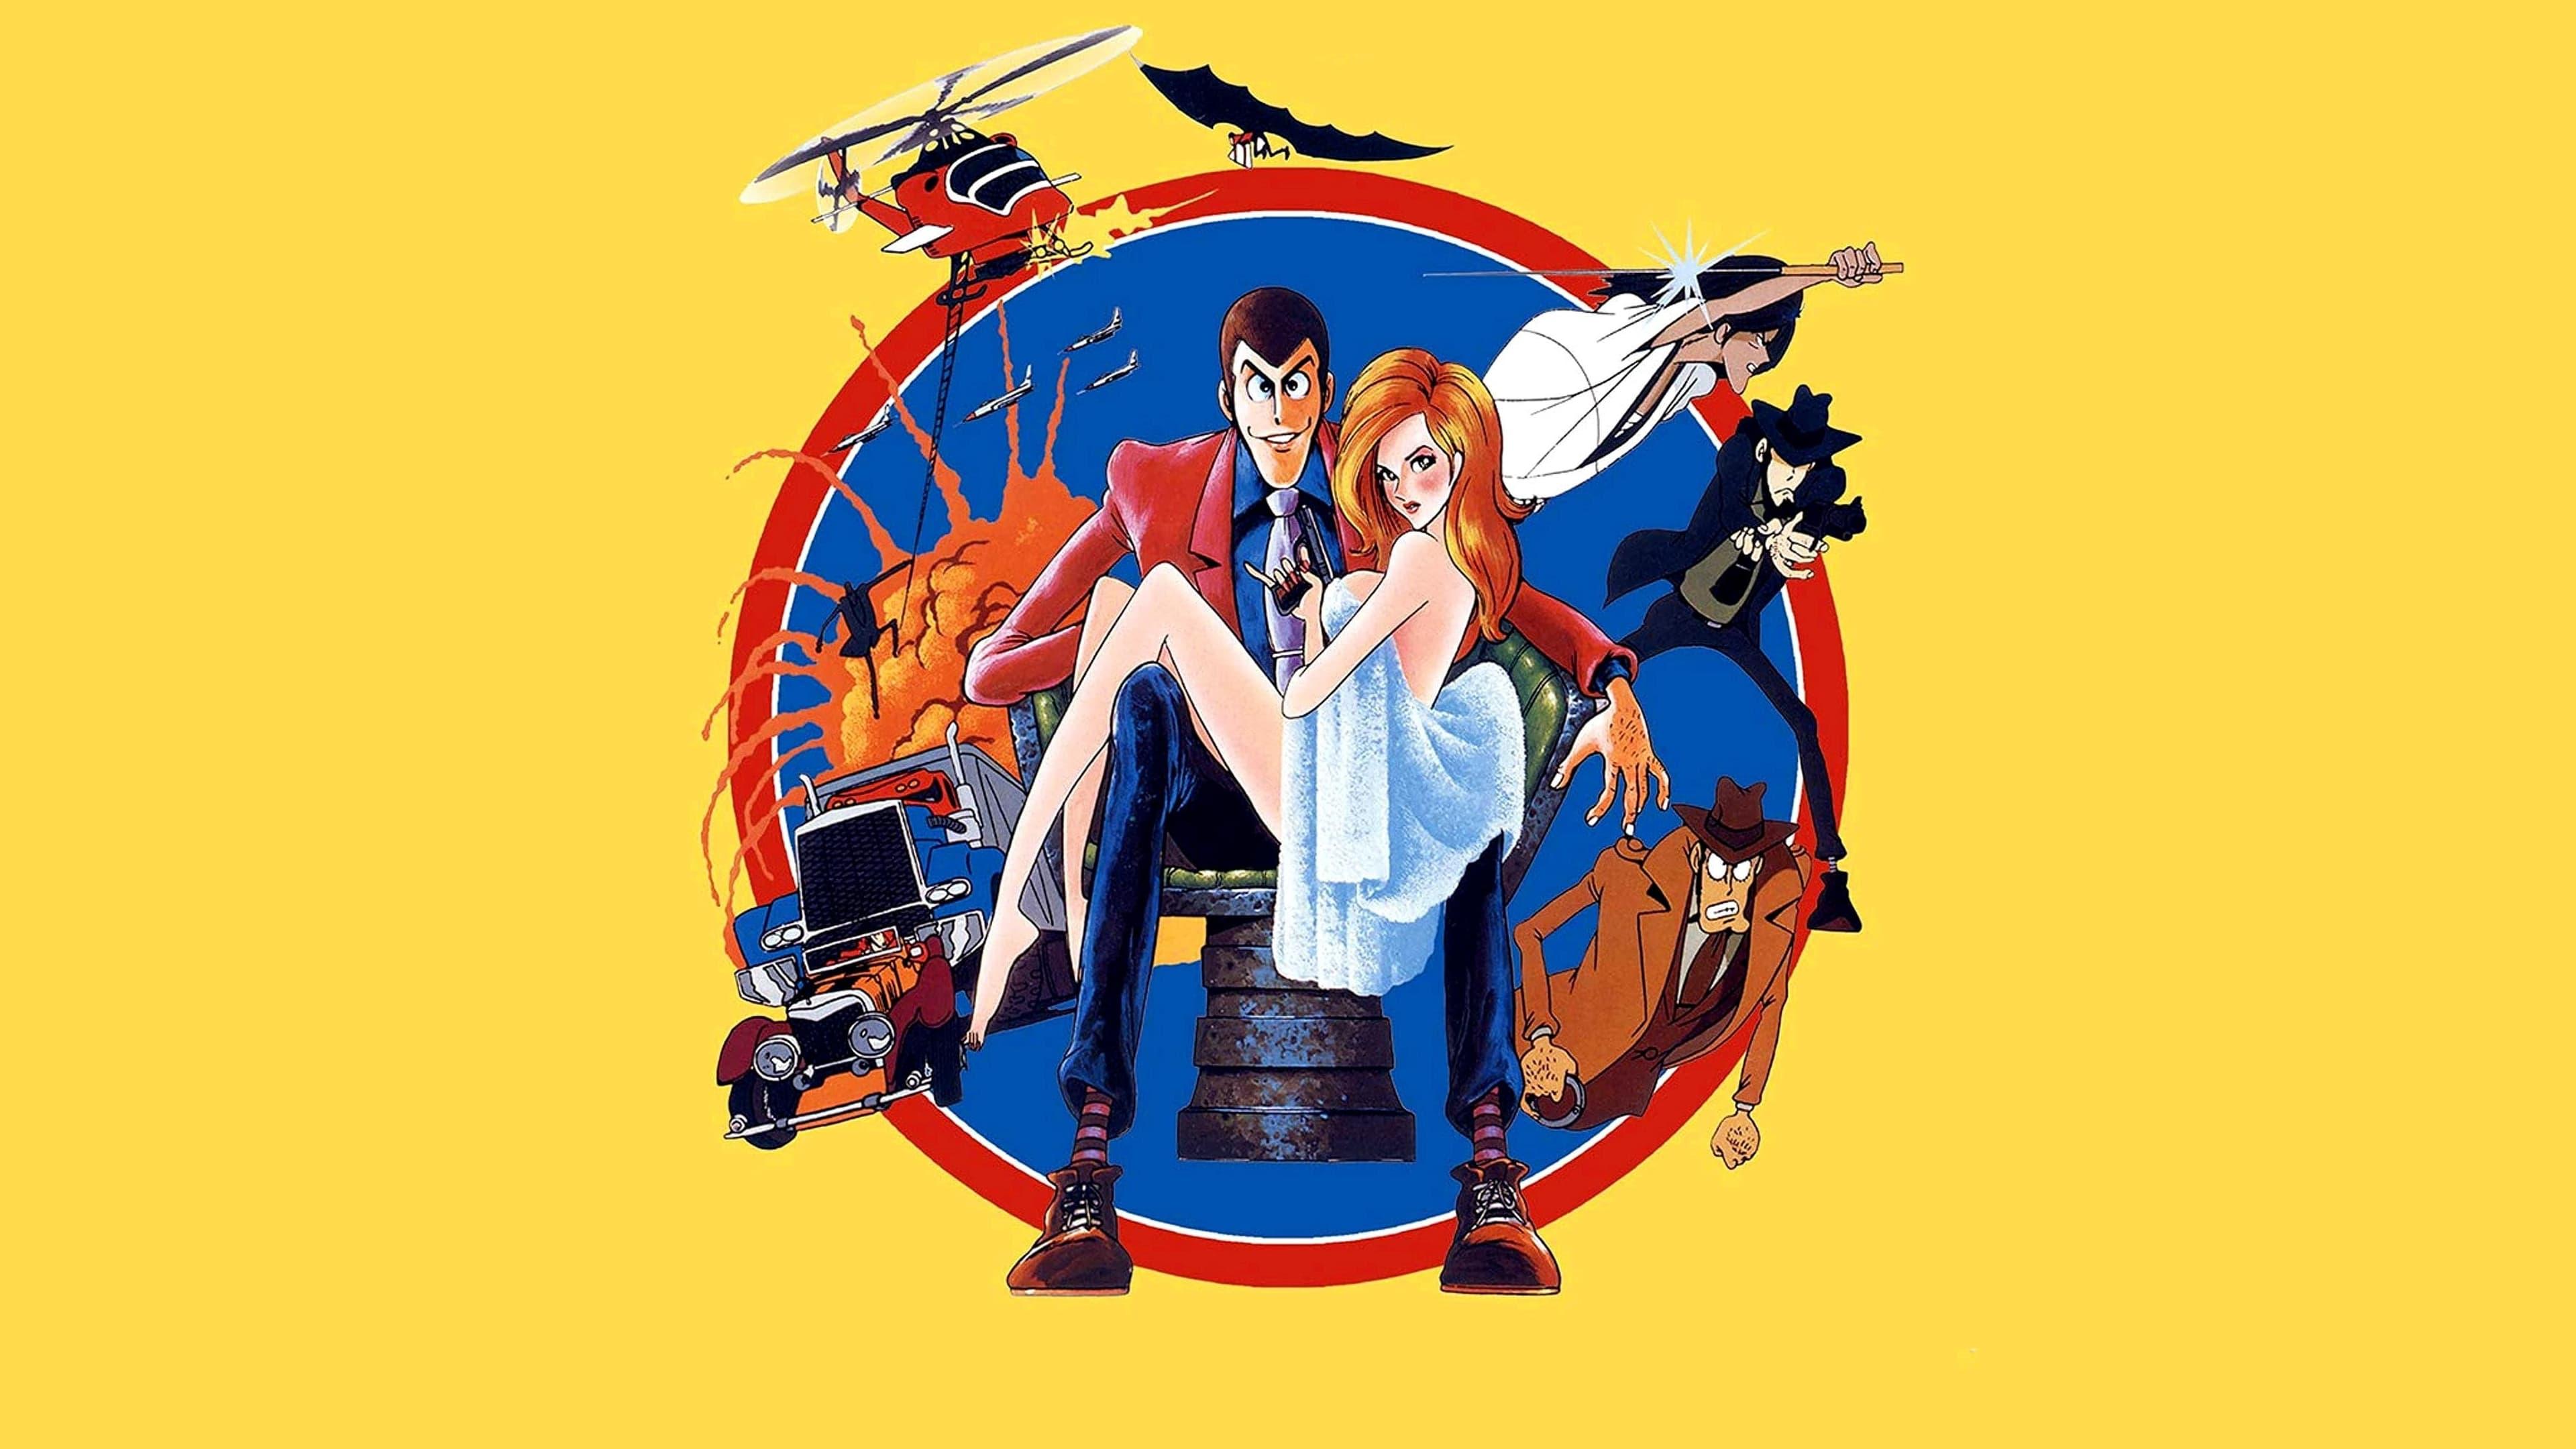 Lupin the Third: The Mystery of Mamo backdrop